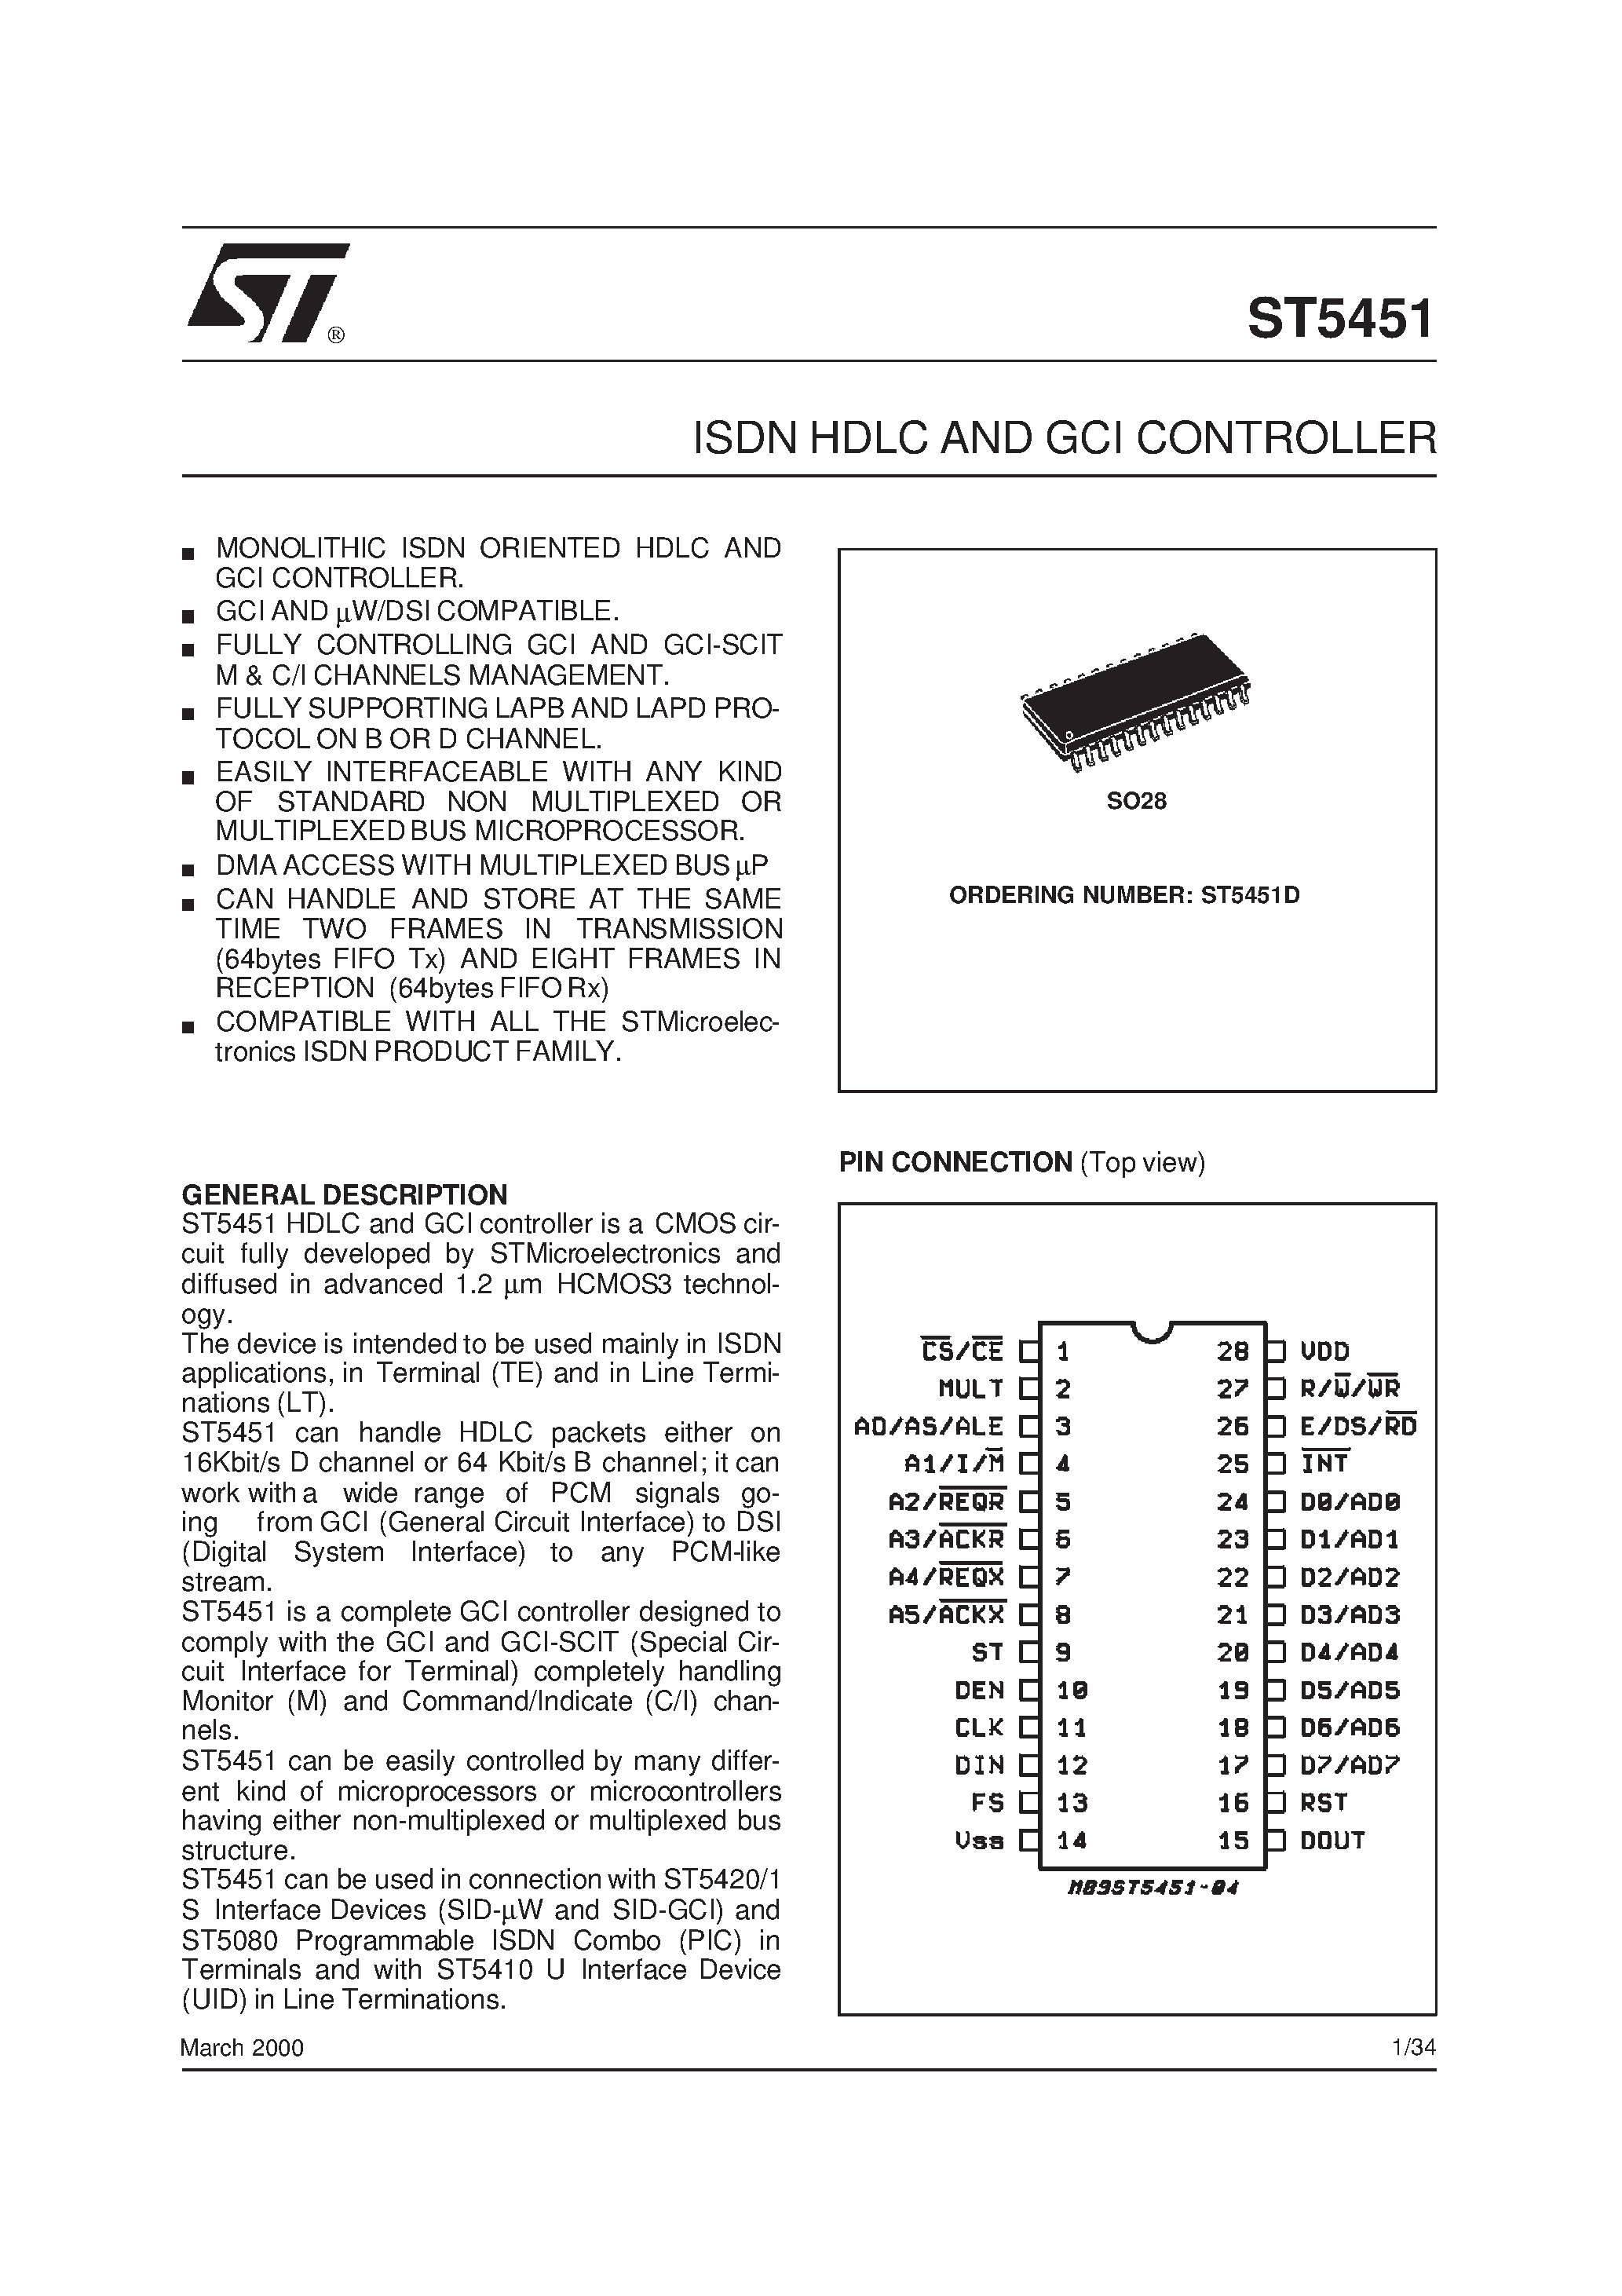 Datasheet ST5451 - ISDN HDLC AND GCI CONTROLLER page 1